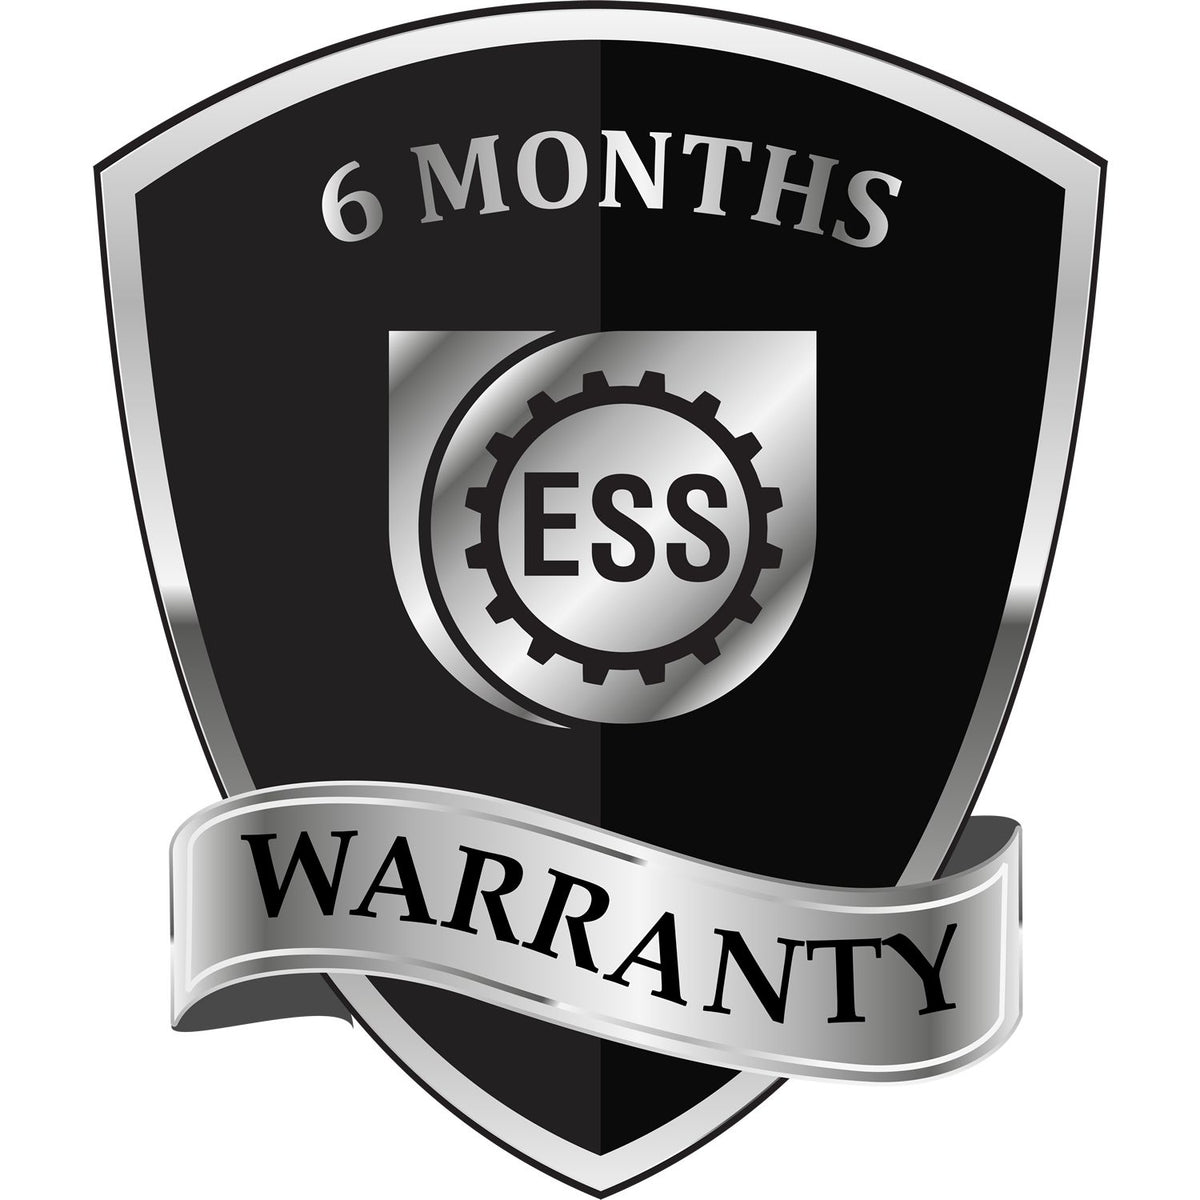 A badge or emblem showing a warranty icon for the Self-Inking Alaska PE Stamp